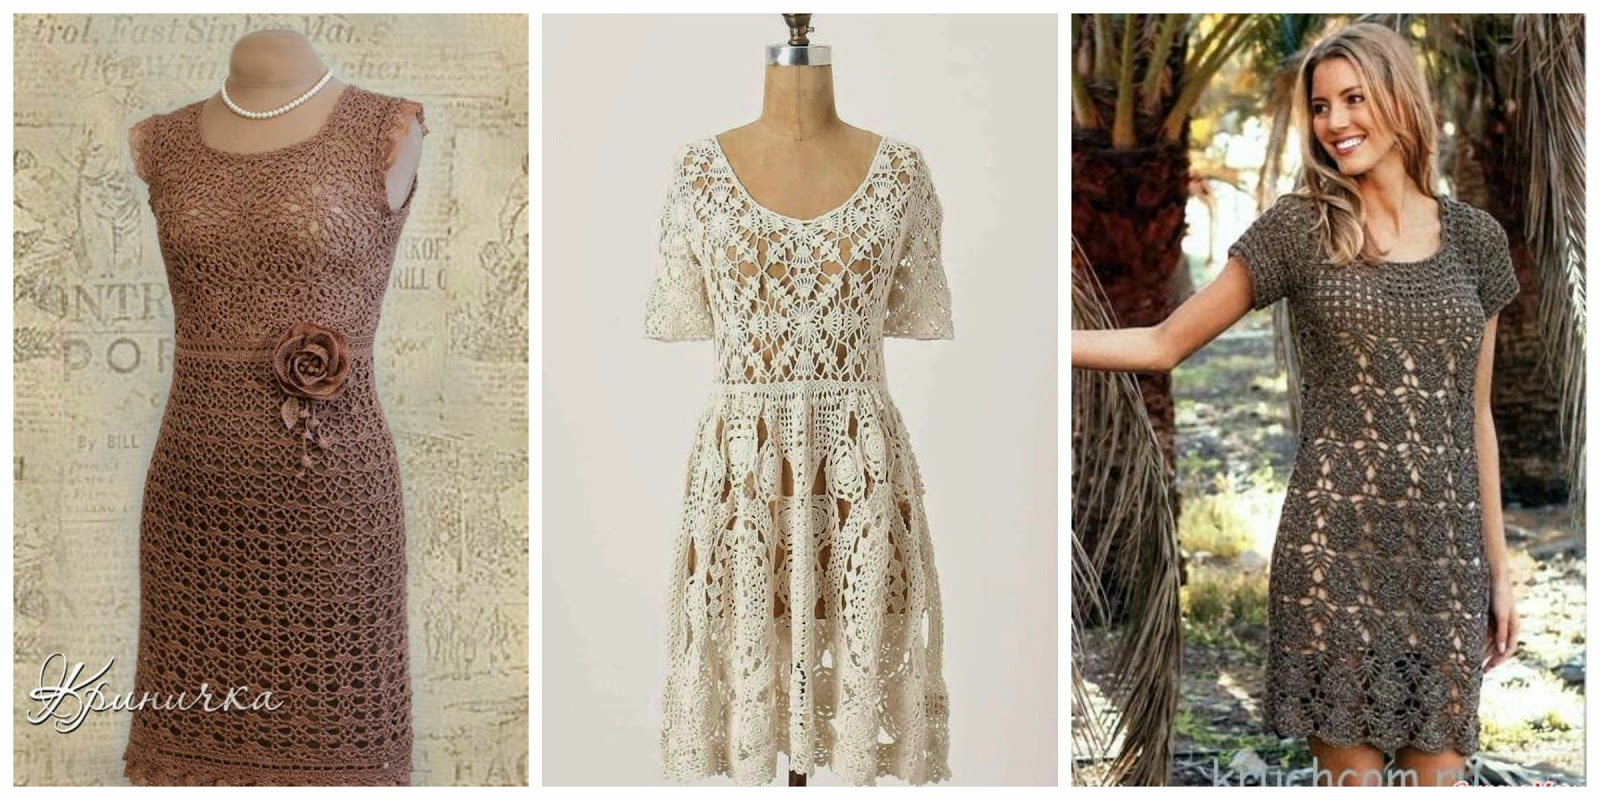 Crochet Clothing Patterns Add Spice To Your Wardrobe With Crochet Dress Patterns Crochet And